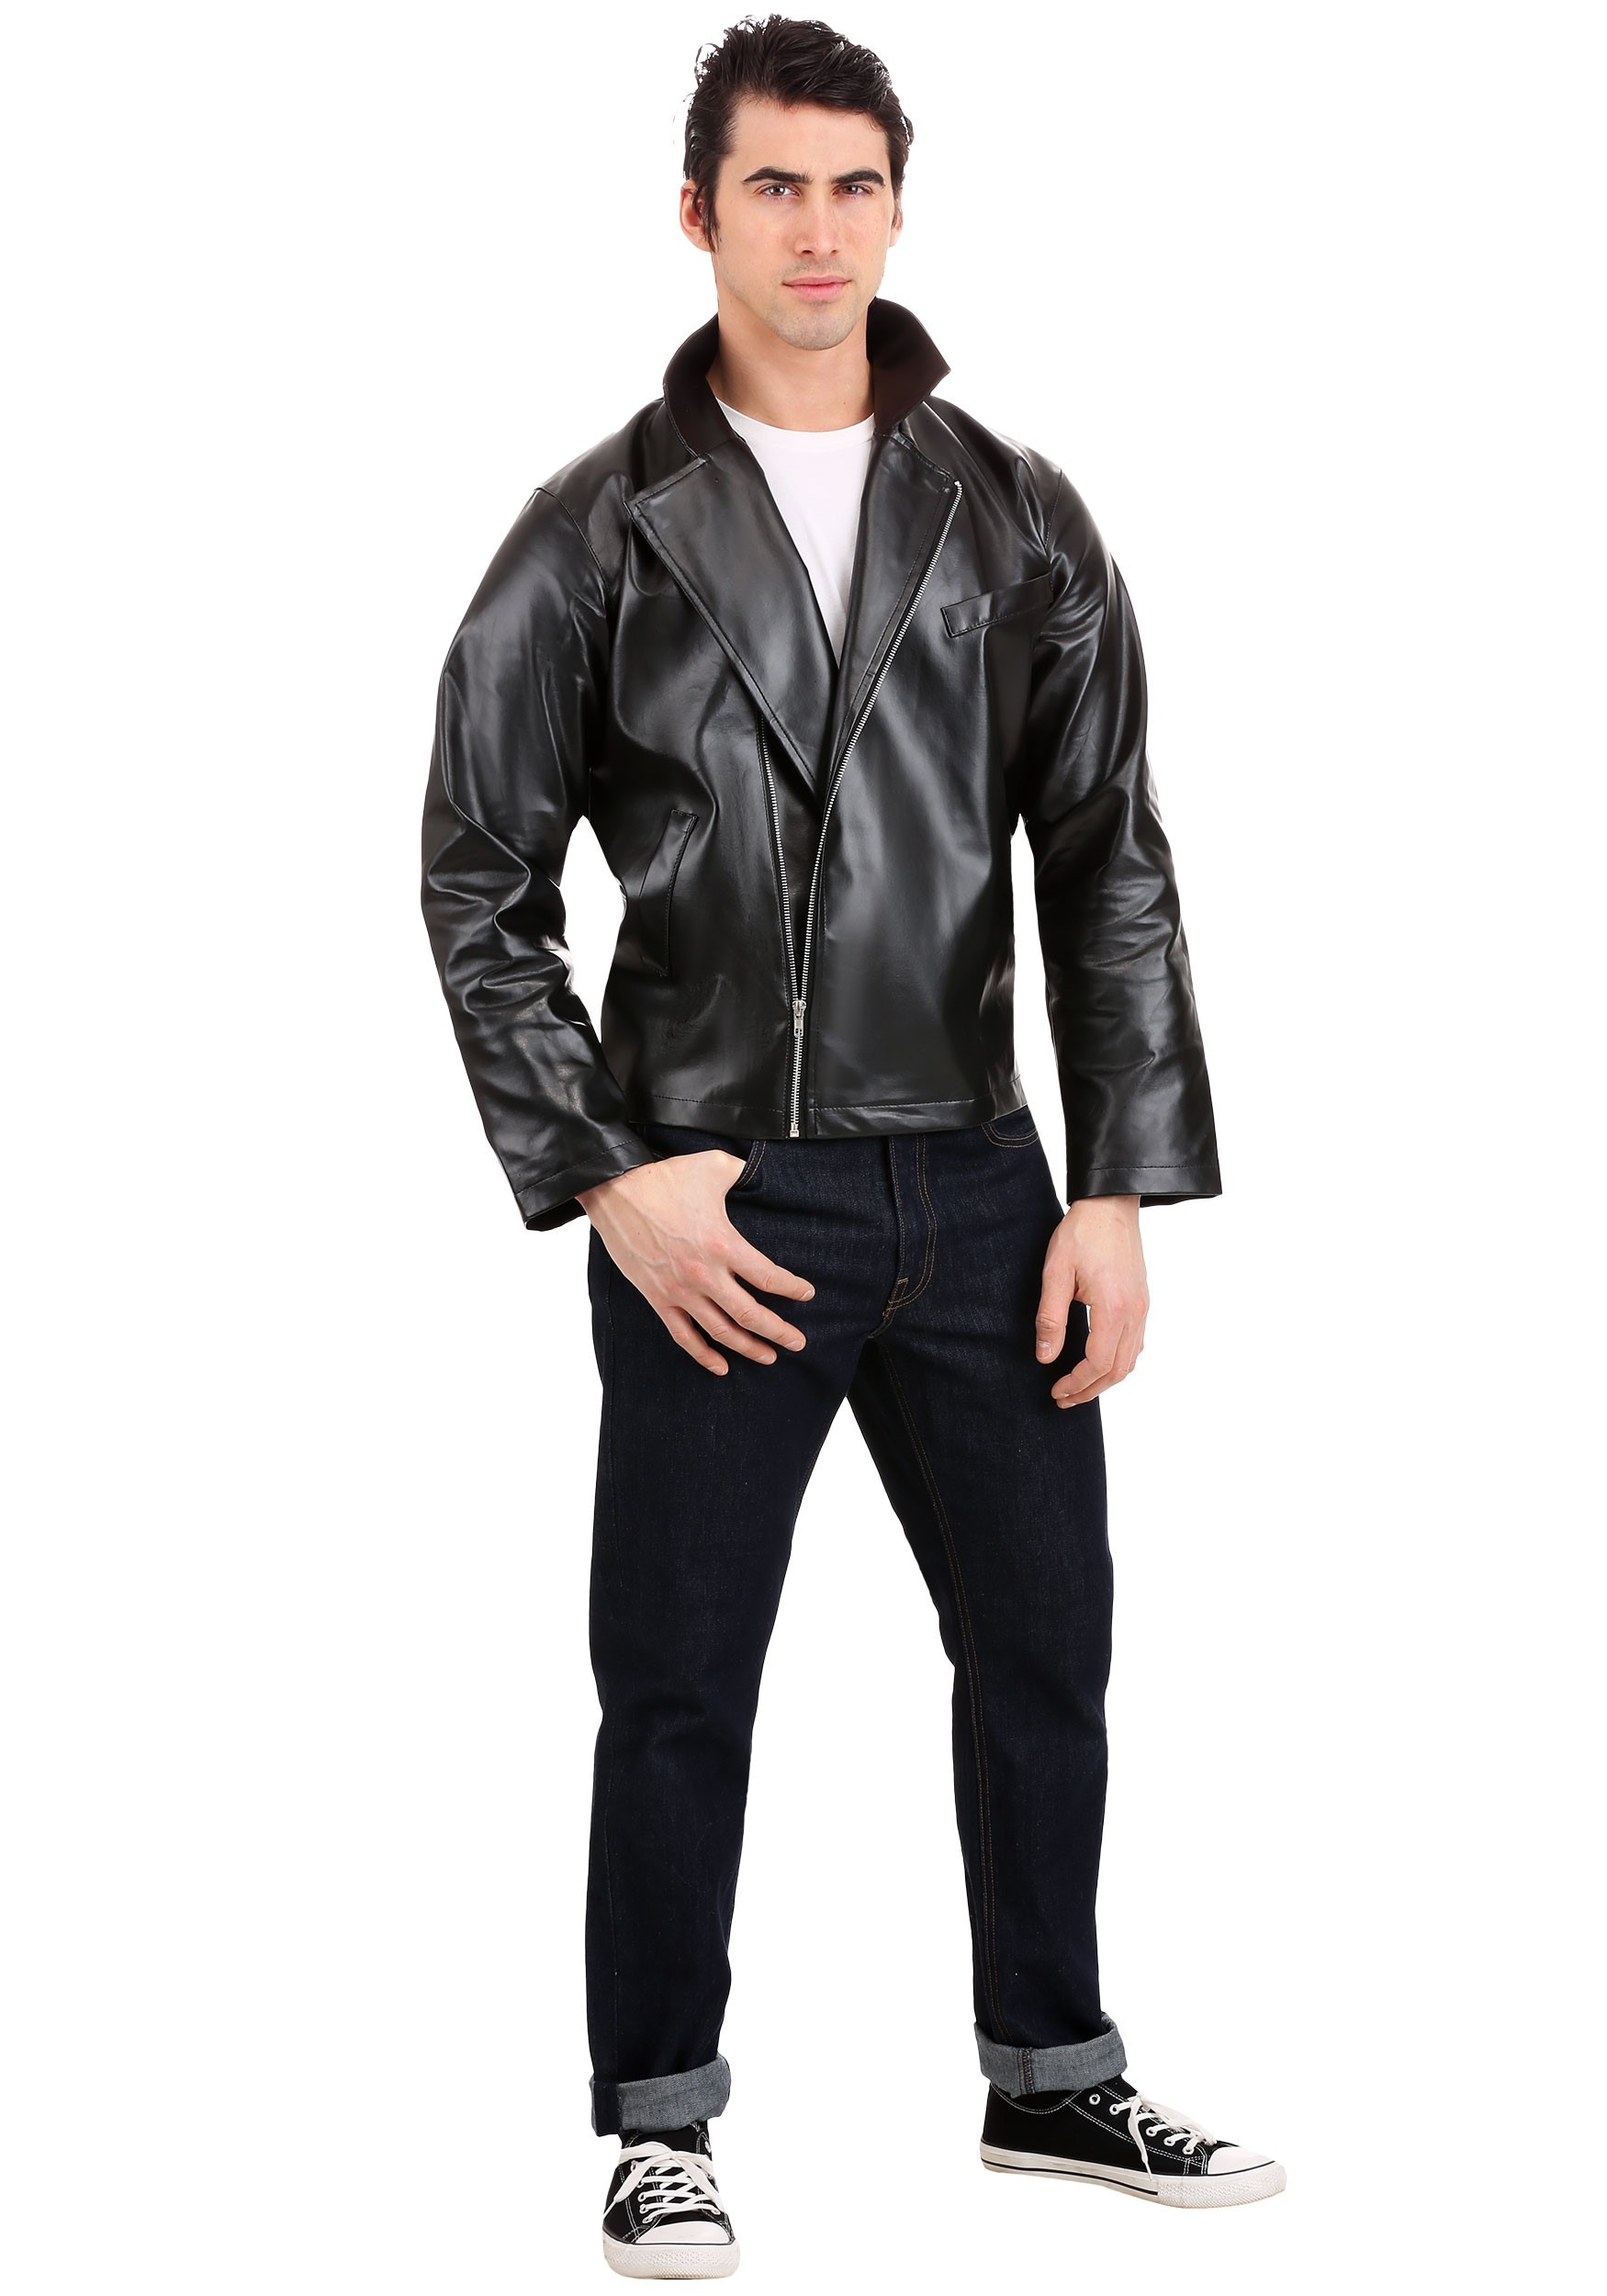 Image of FUN Costumes Grease T-Birds Jacket Costume for Adults